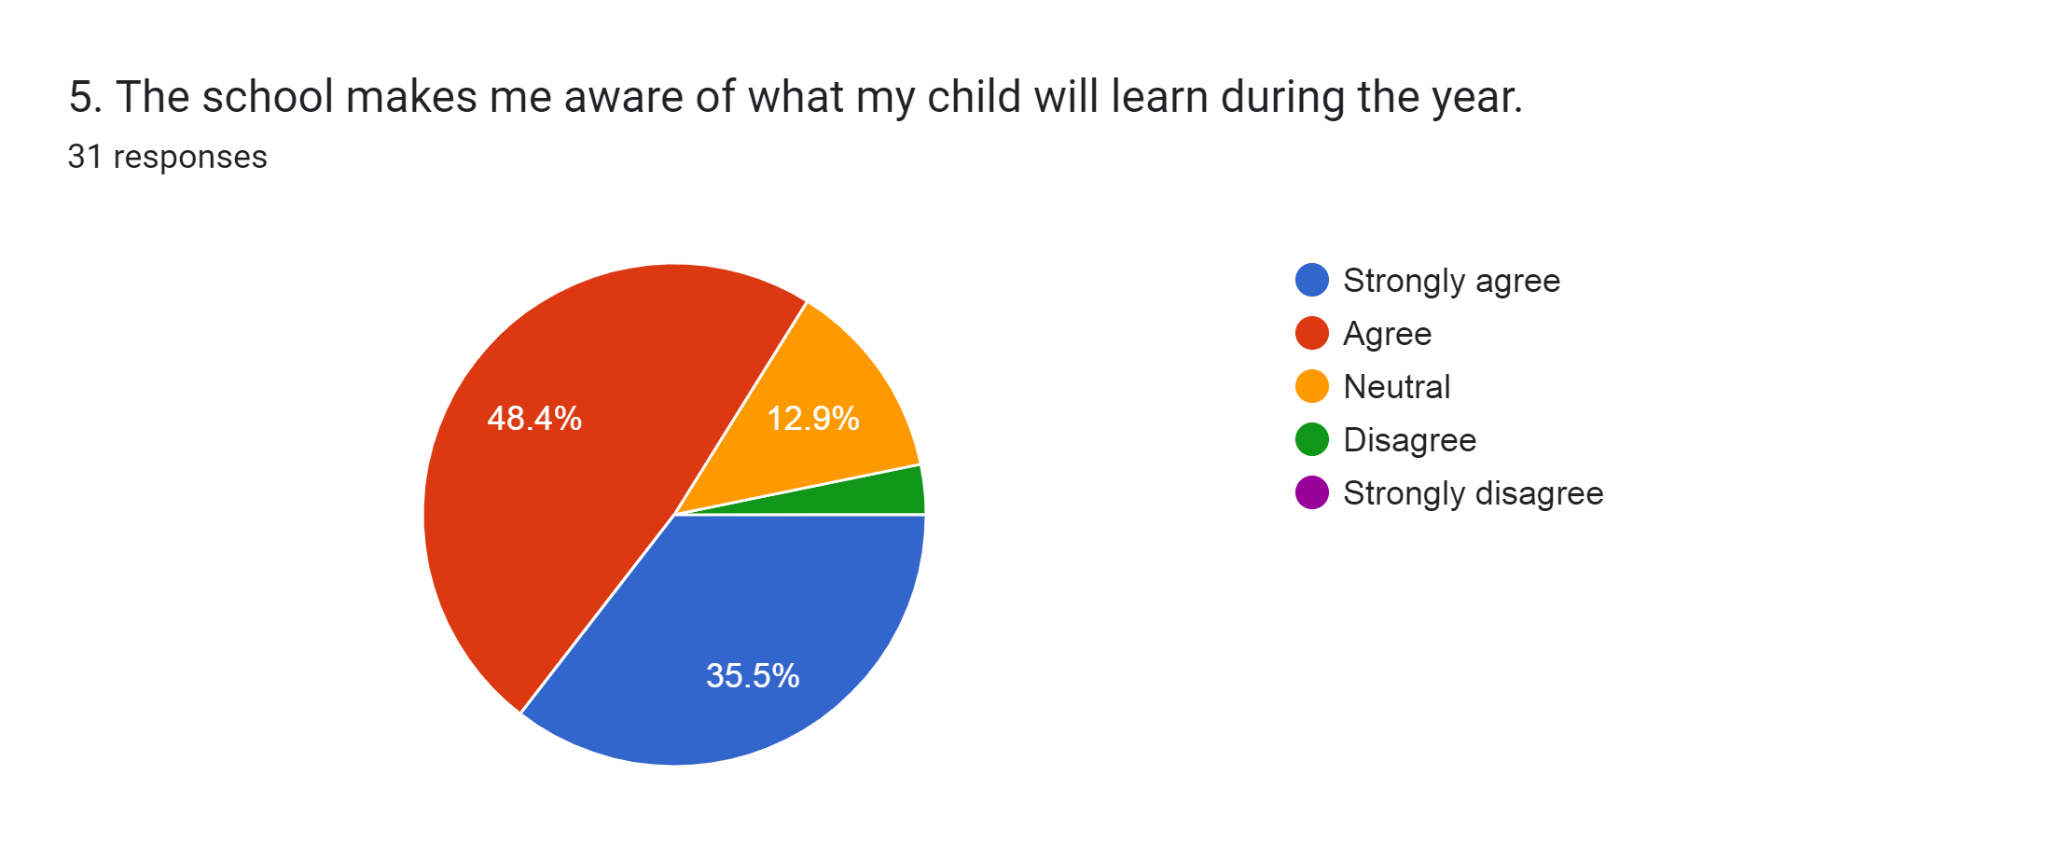 Forms response chart. Question title: 5. The school makes me aware of what my child will learn during the year.. Number of responses: 31 responses.